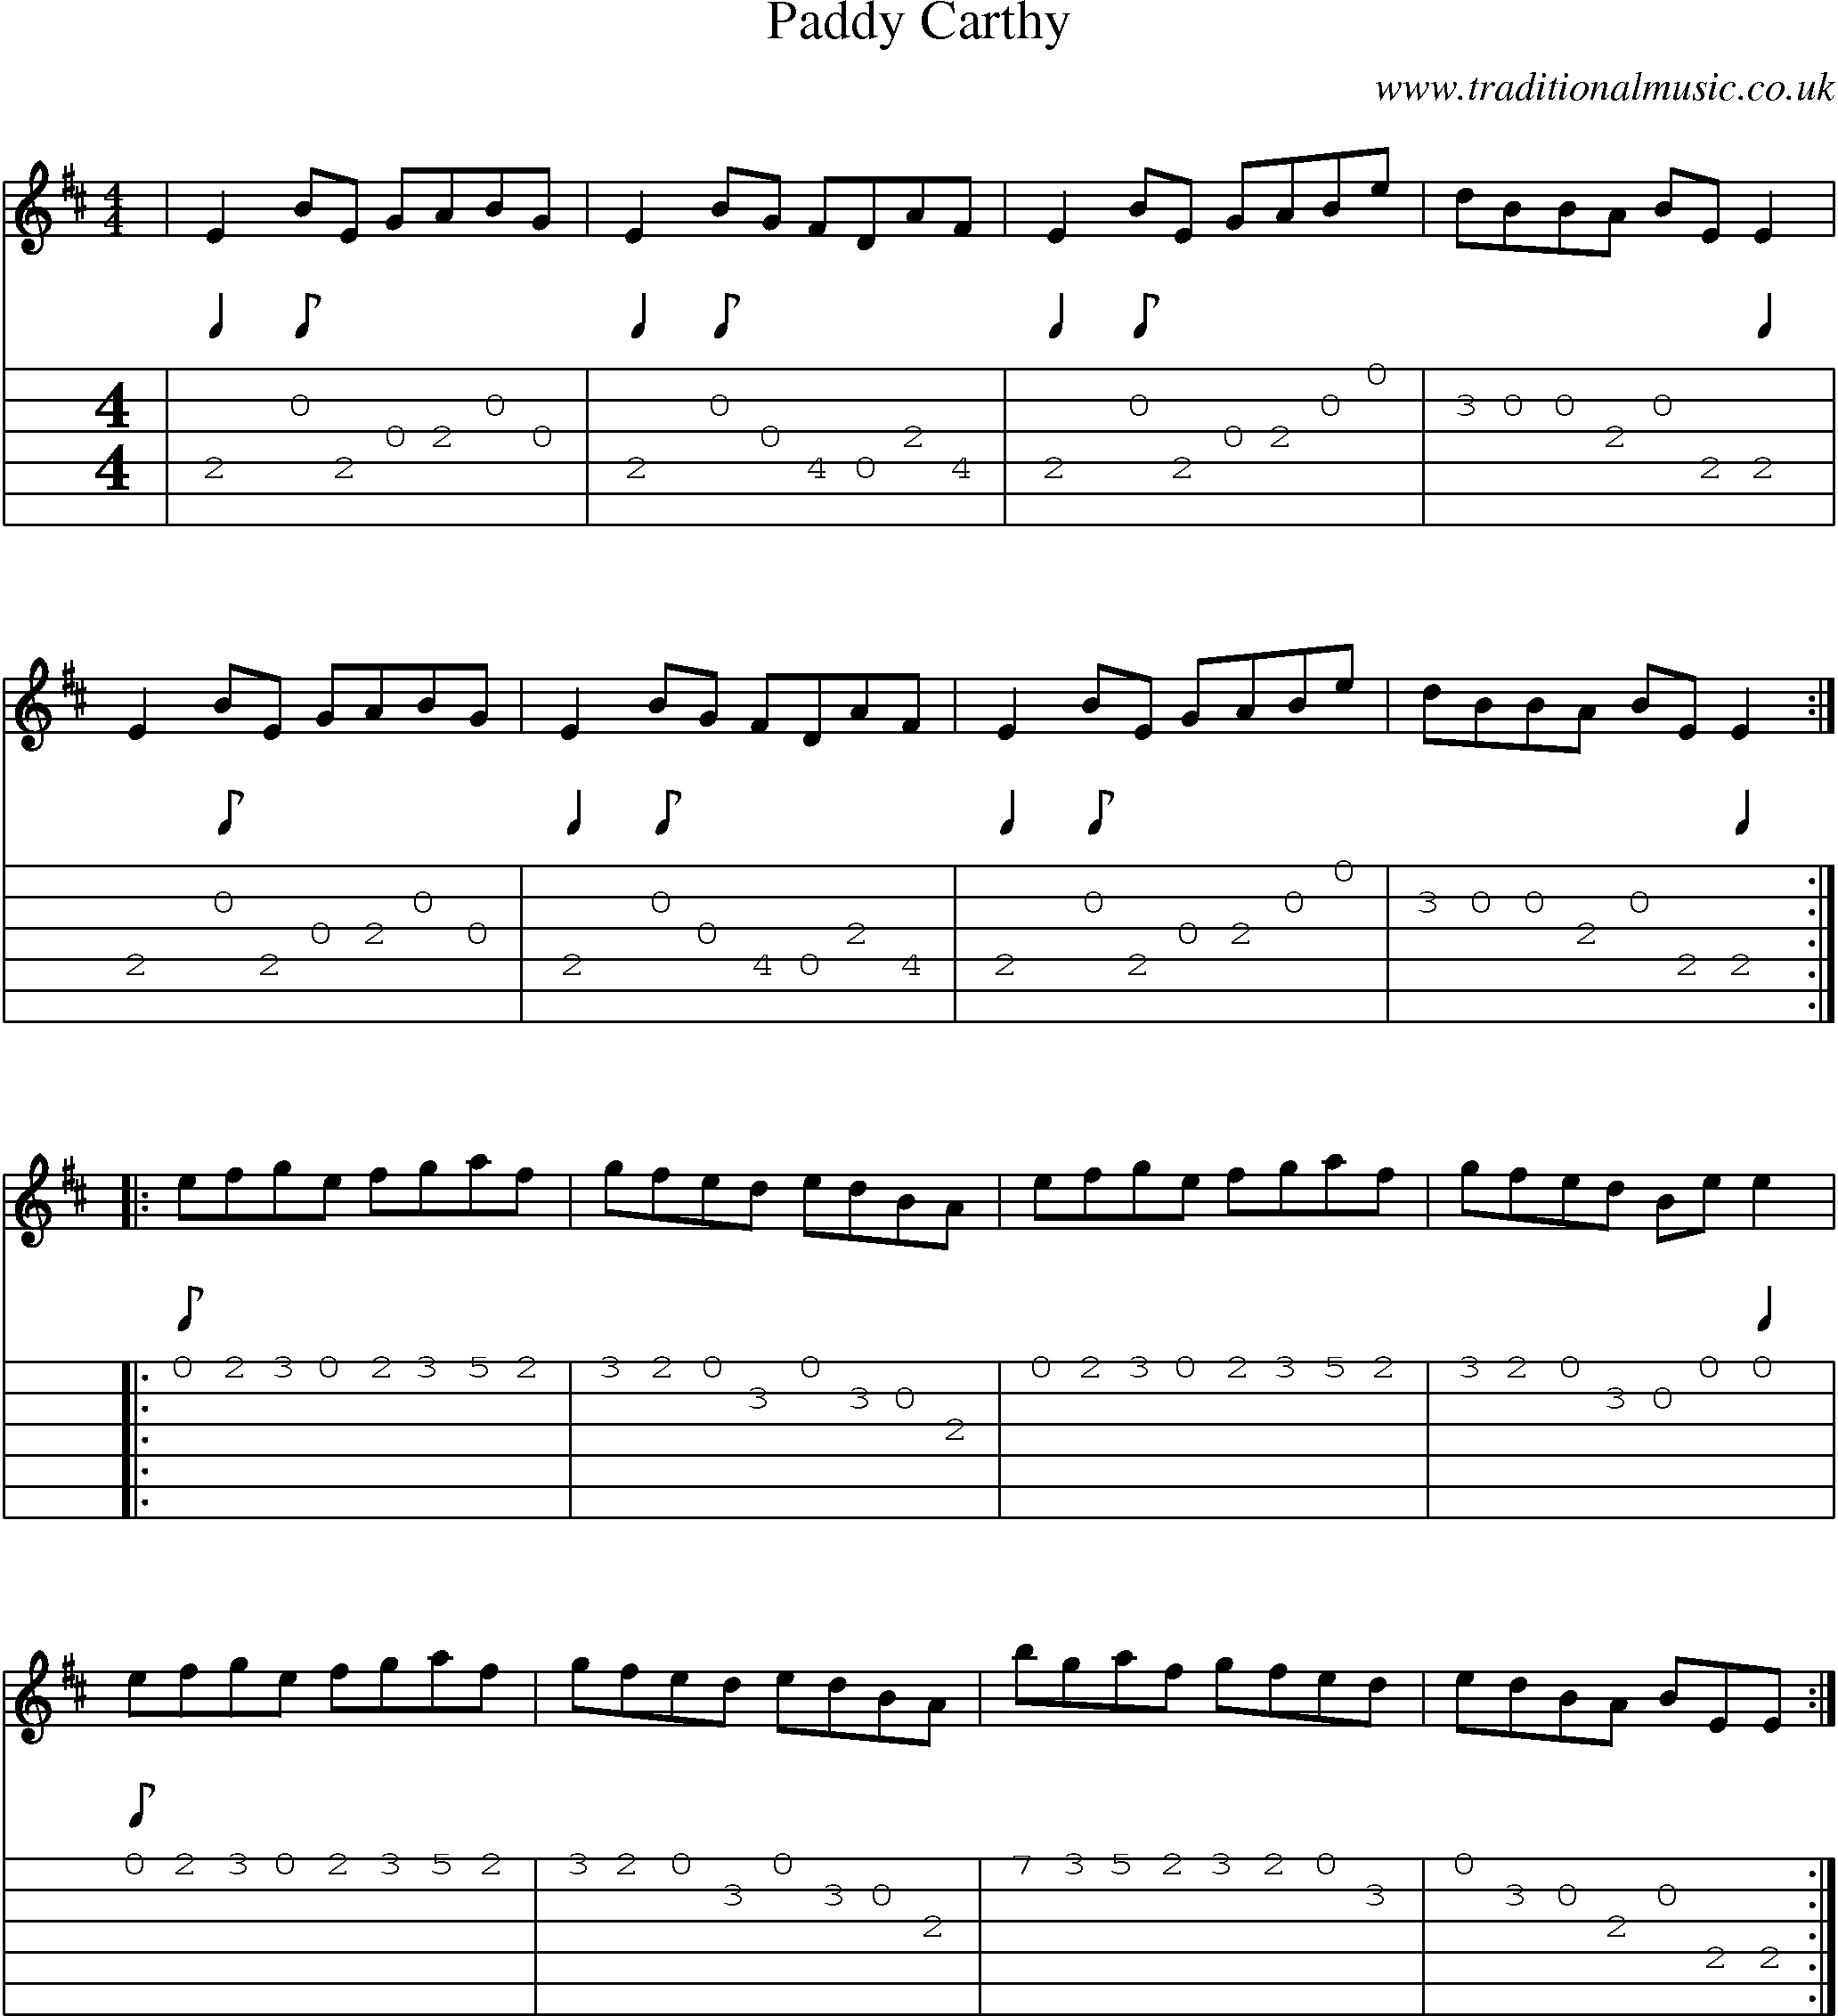 Music Score and Guitar Tabs for Paddy Carthy